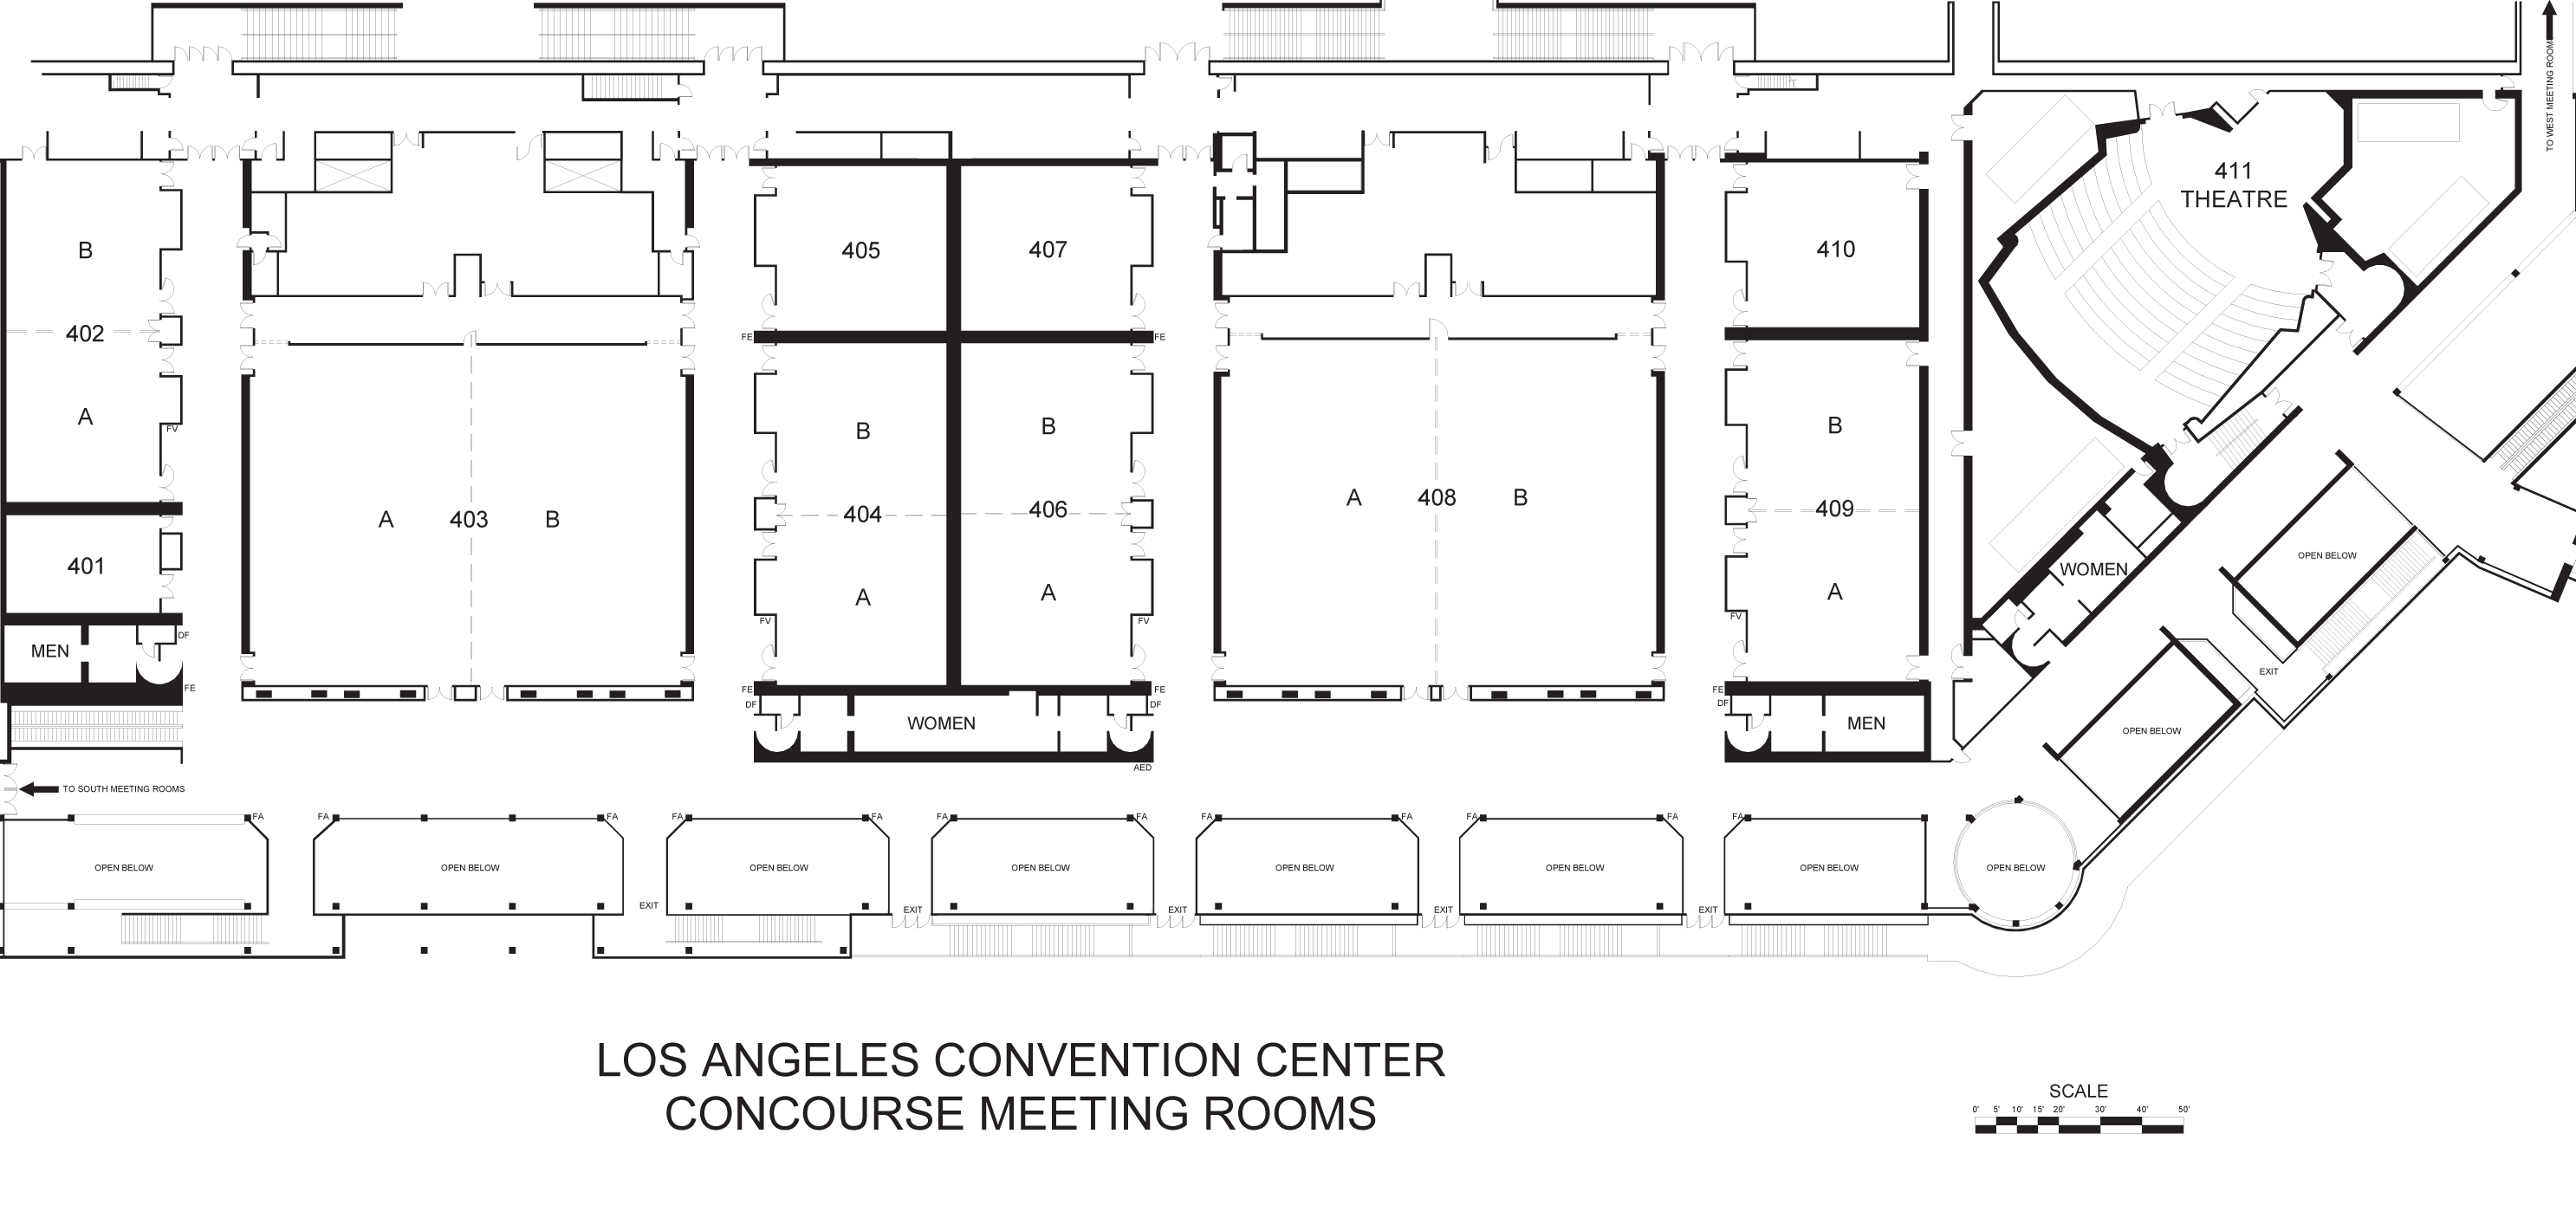 LACC Concourse Meeting Rooms